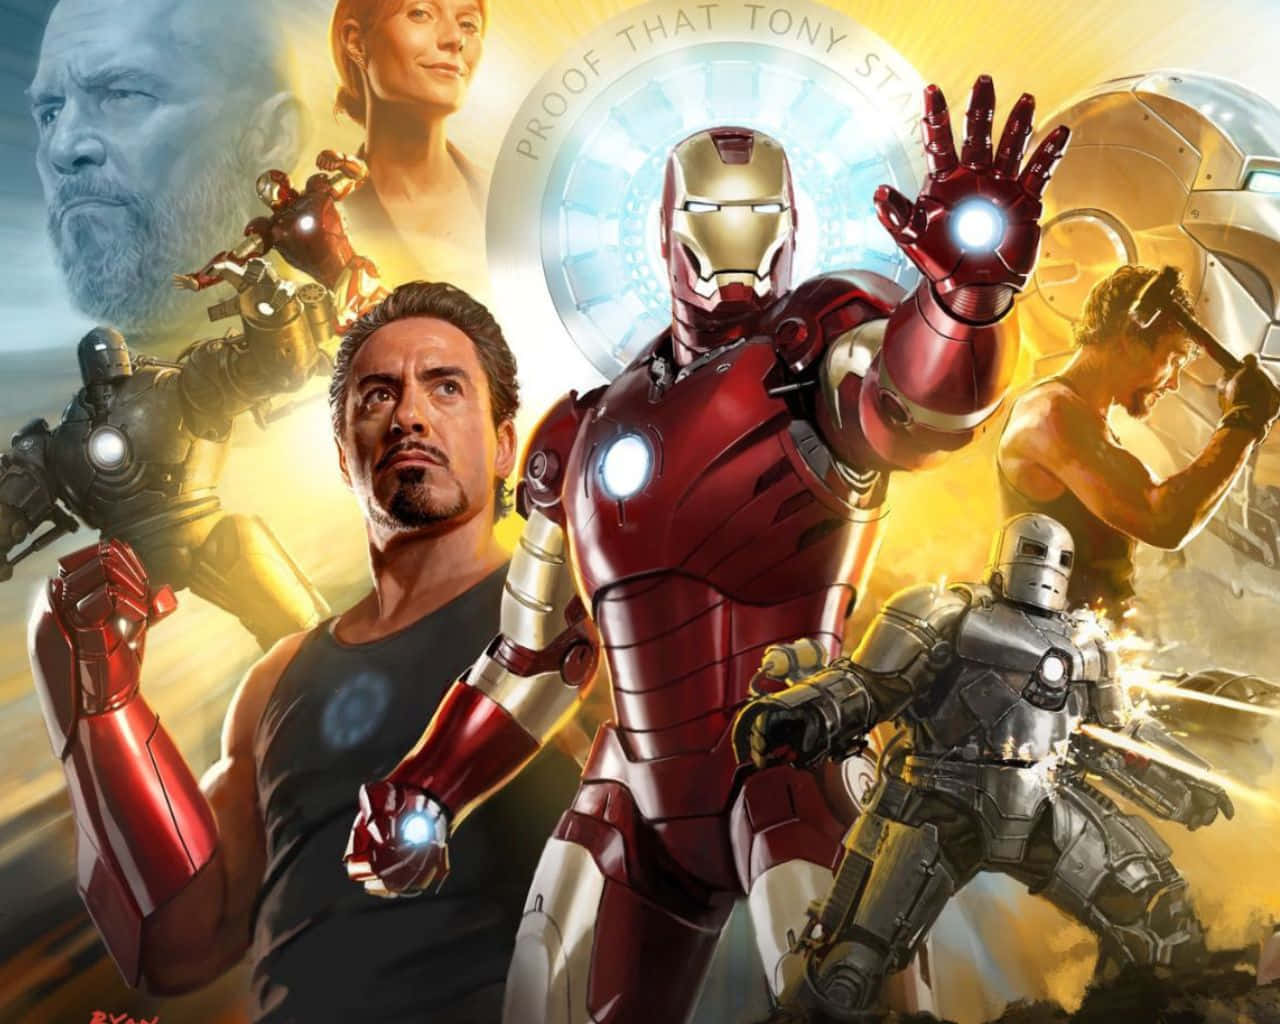 Iron Man battles Iron Monger in a heated battle of strength and wits Wallpaper